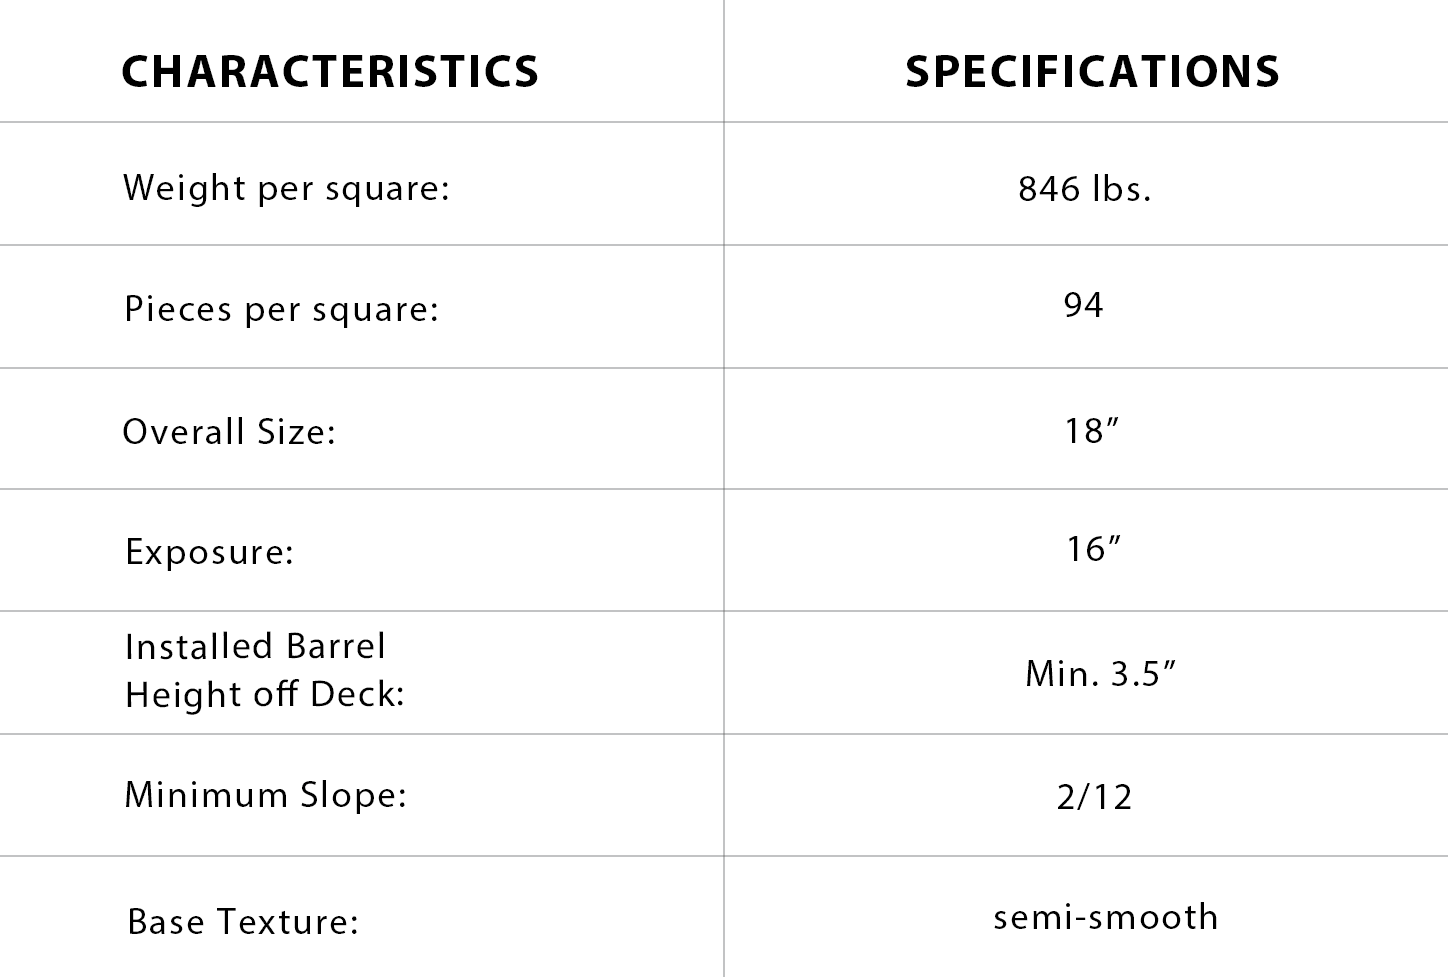 Tile characteristics and specifications